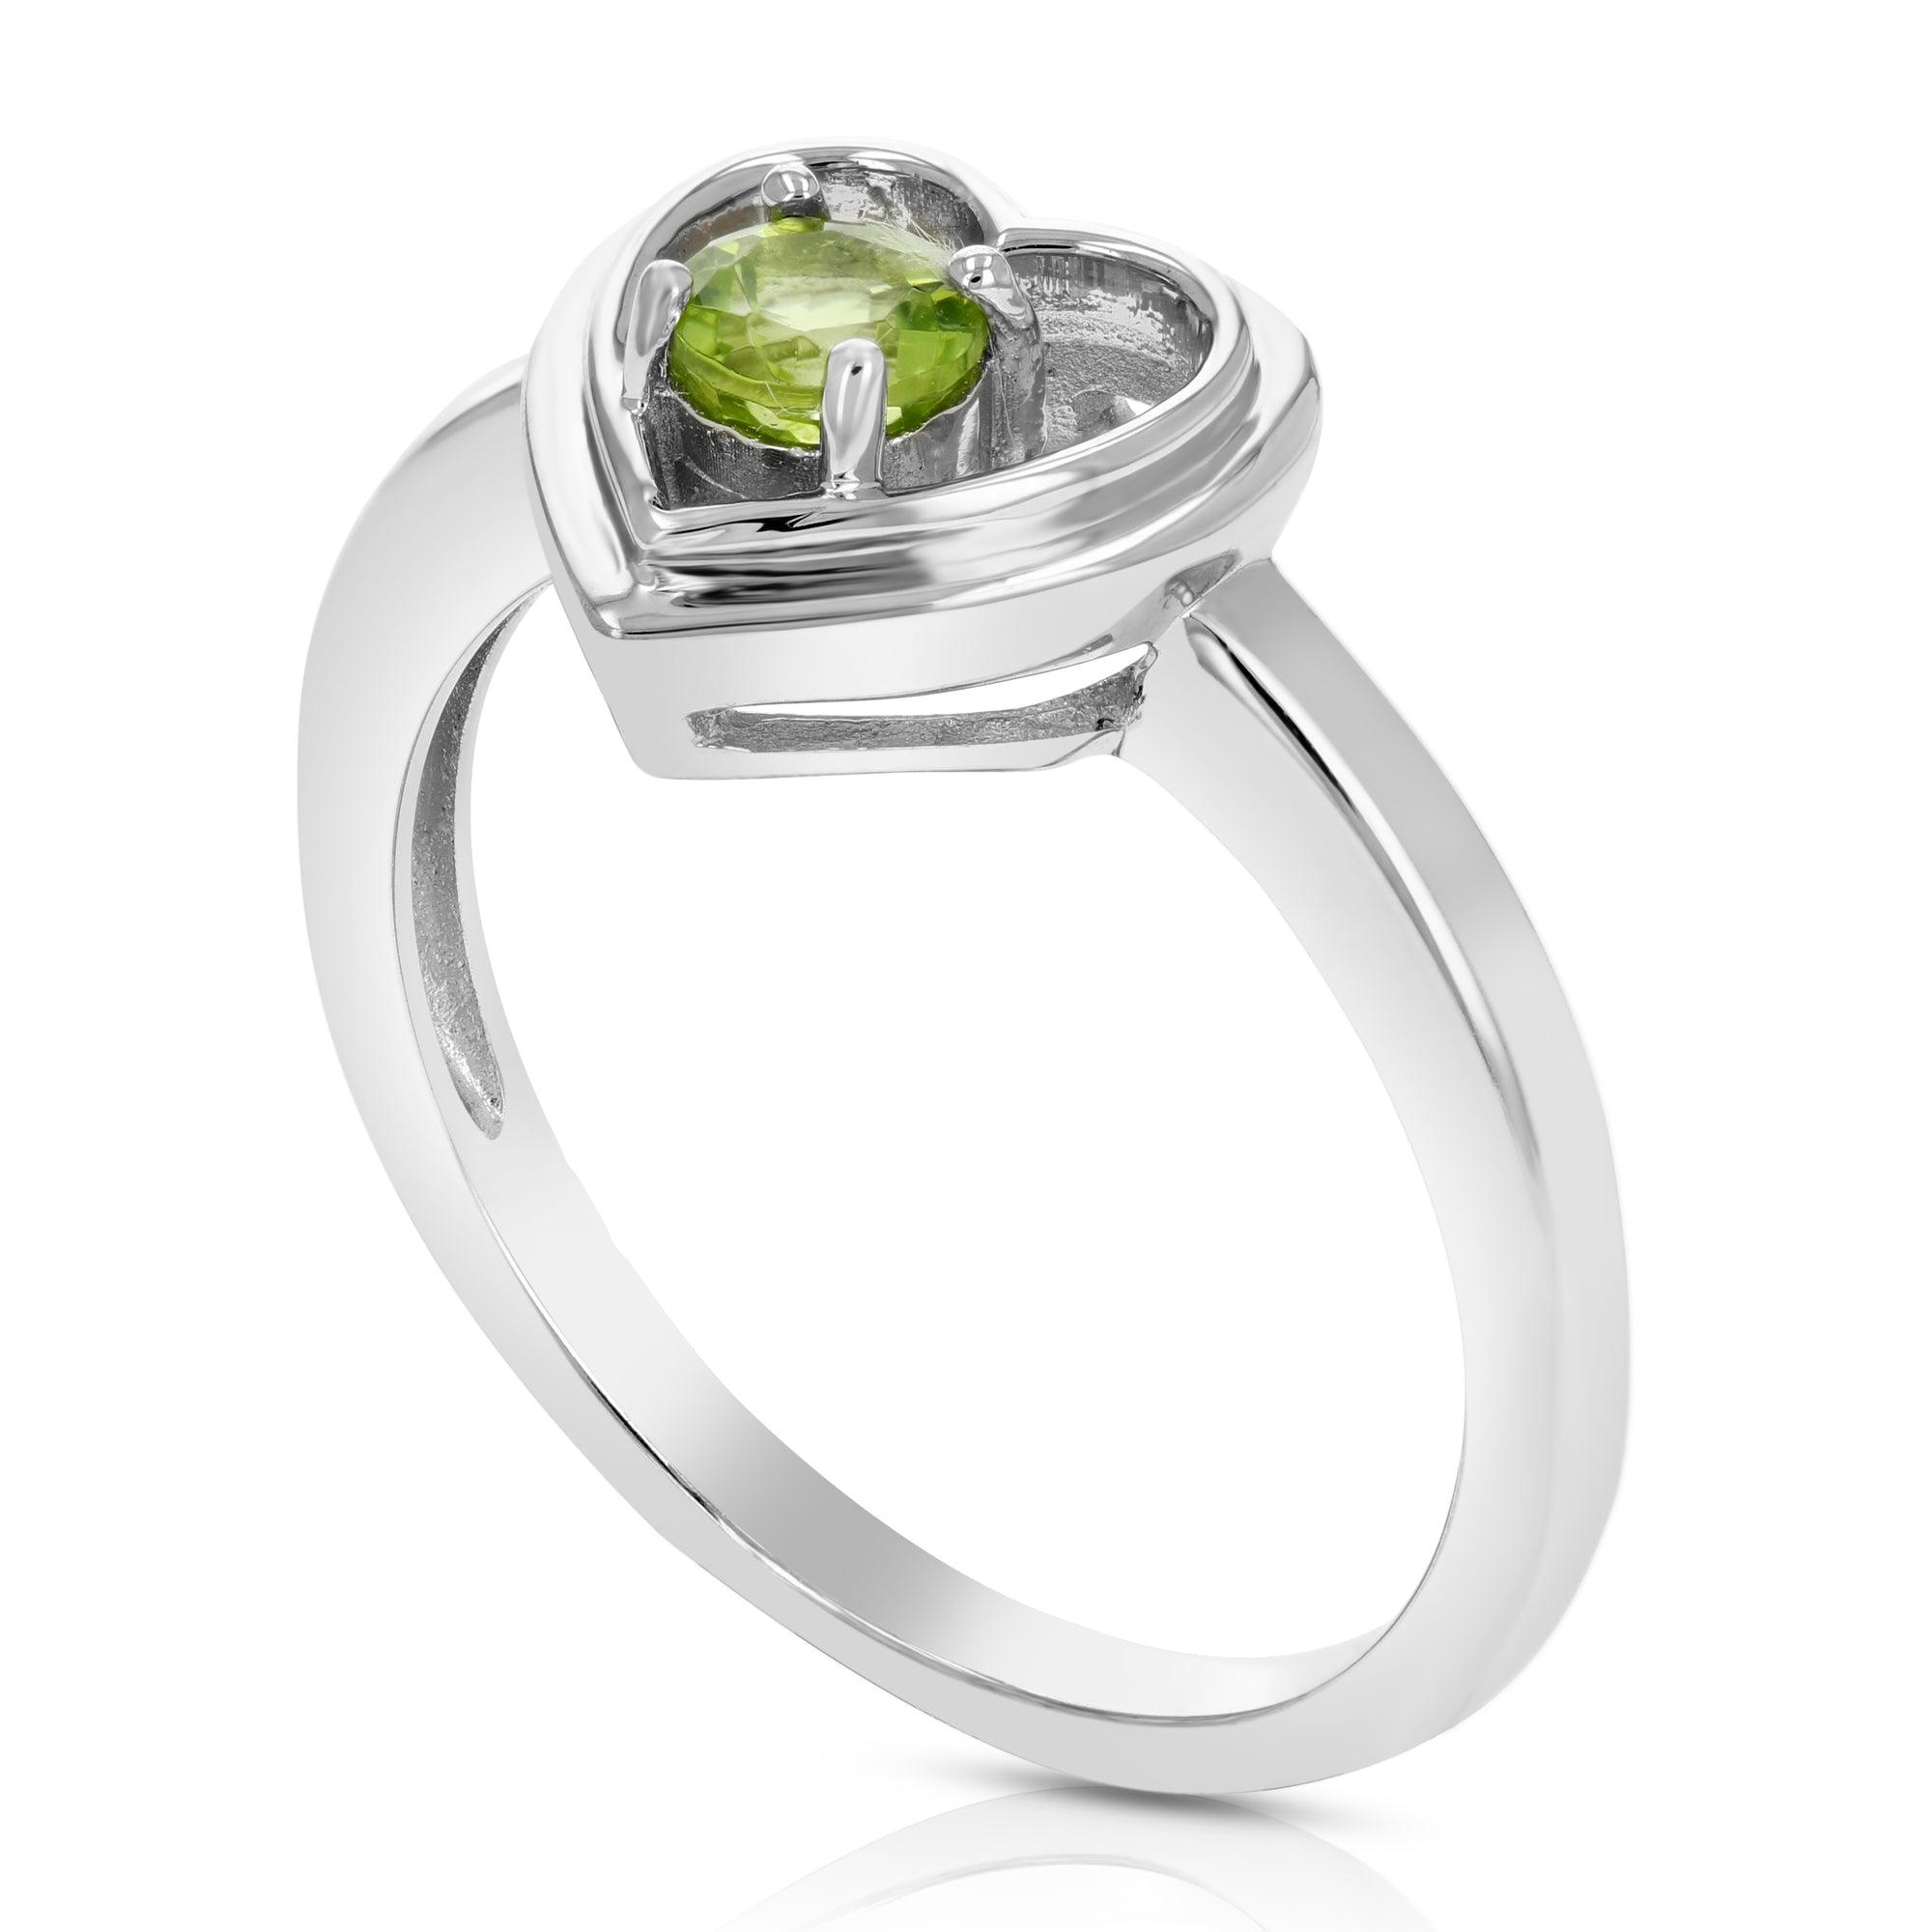 1/4 cttw Peridot Ring in .925 Sterling Silver with Rhodium Plating Round Shape